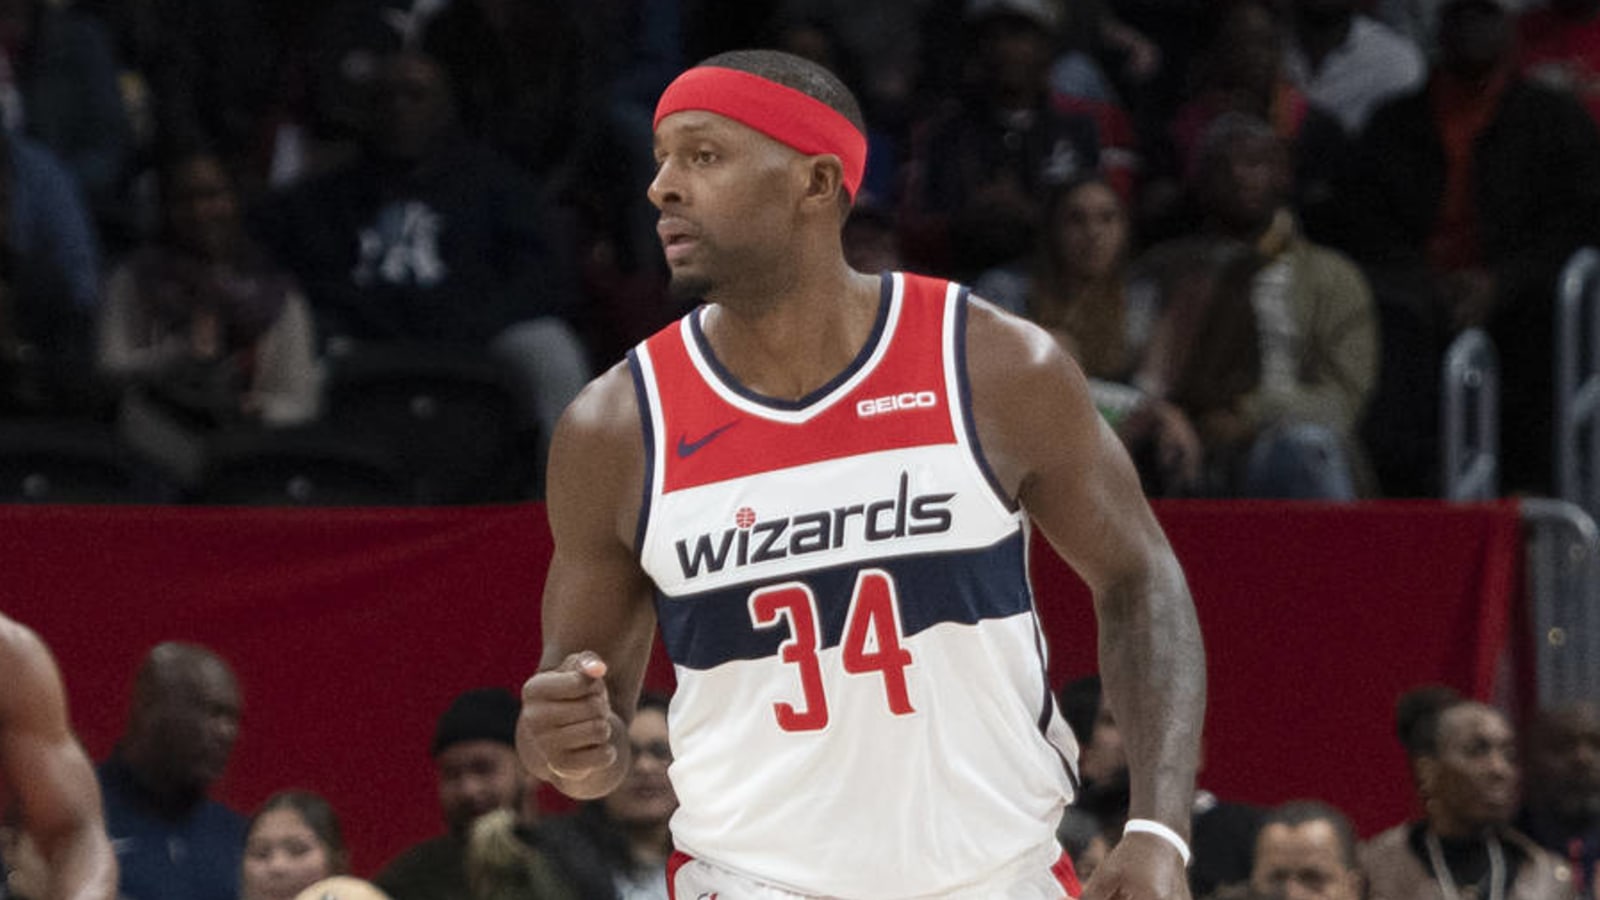 C.J. Miles goes off on fans' treatment of athletes during games